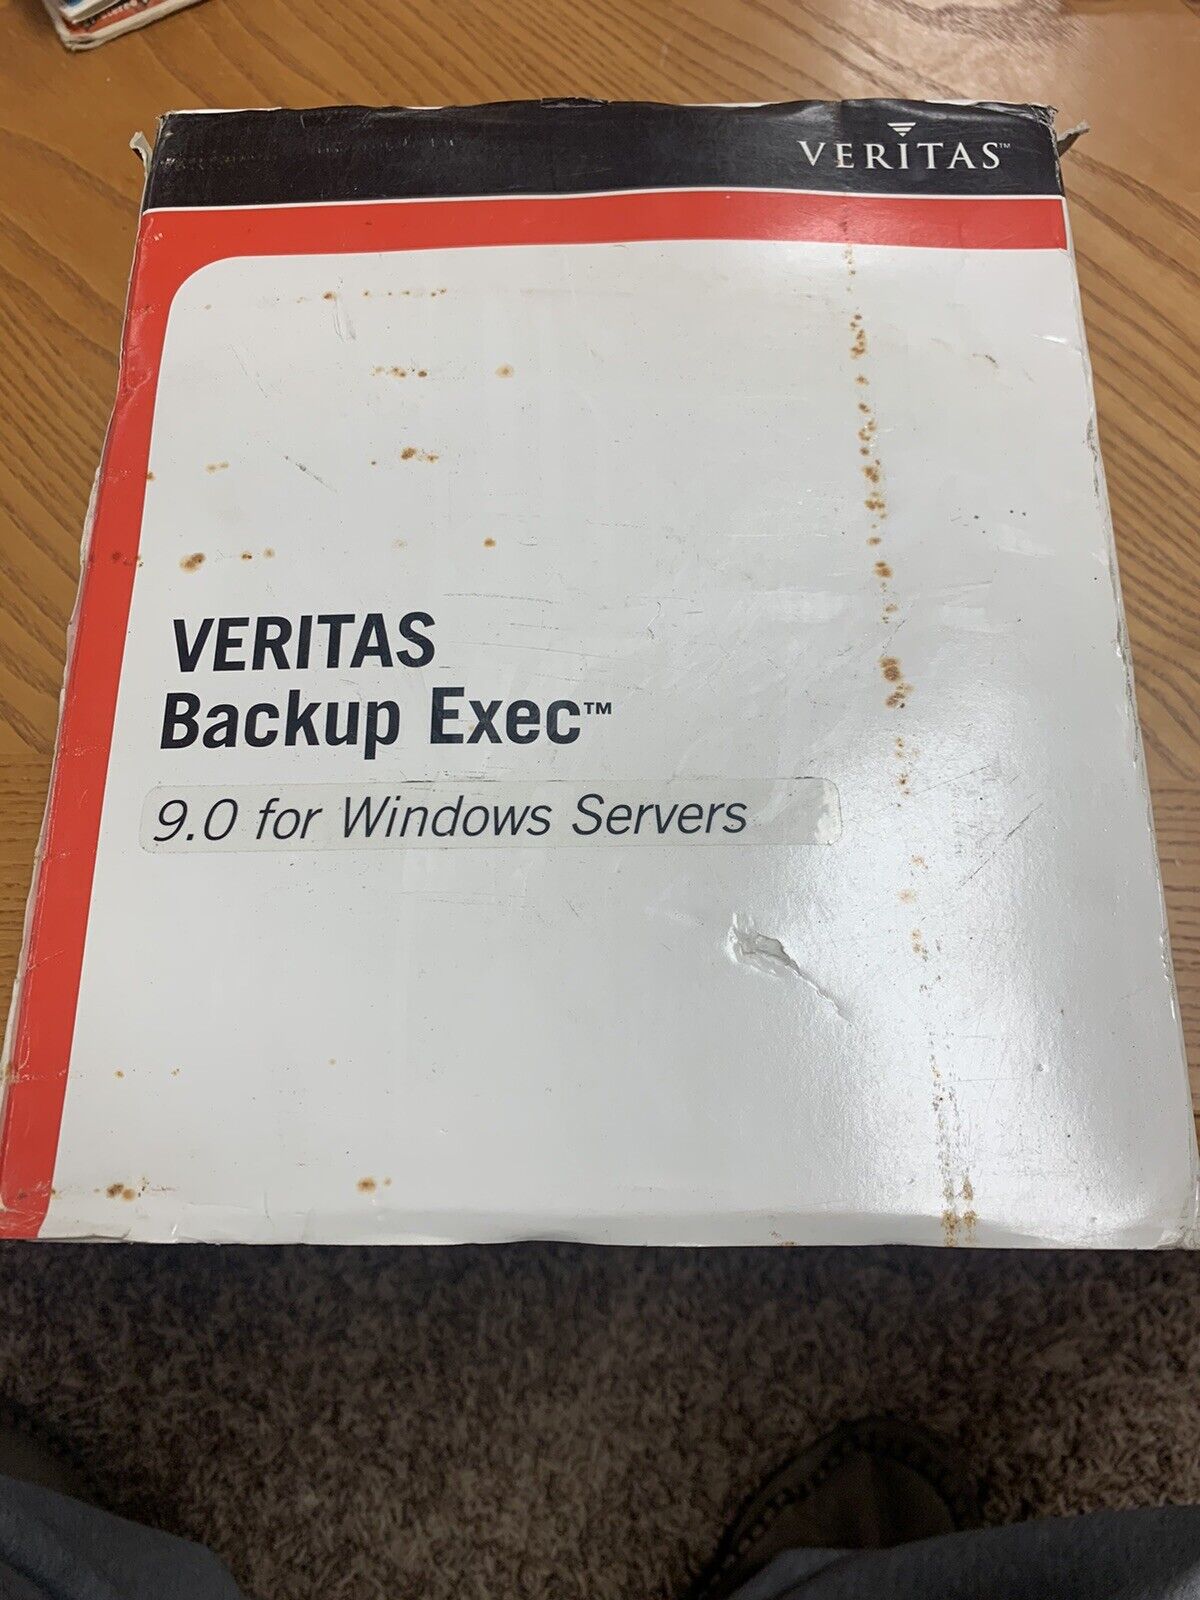 VERITAS Backup Exec 9.0 For Windows Servers-Complete with Disc and Guidebooks